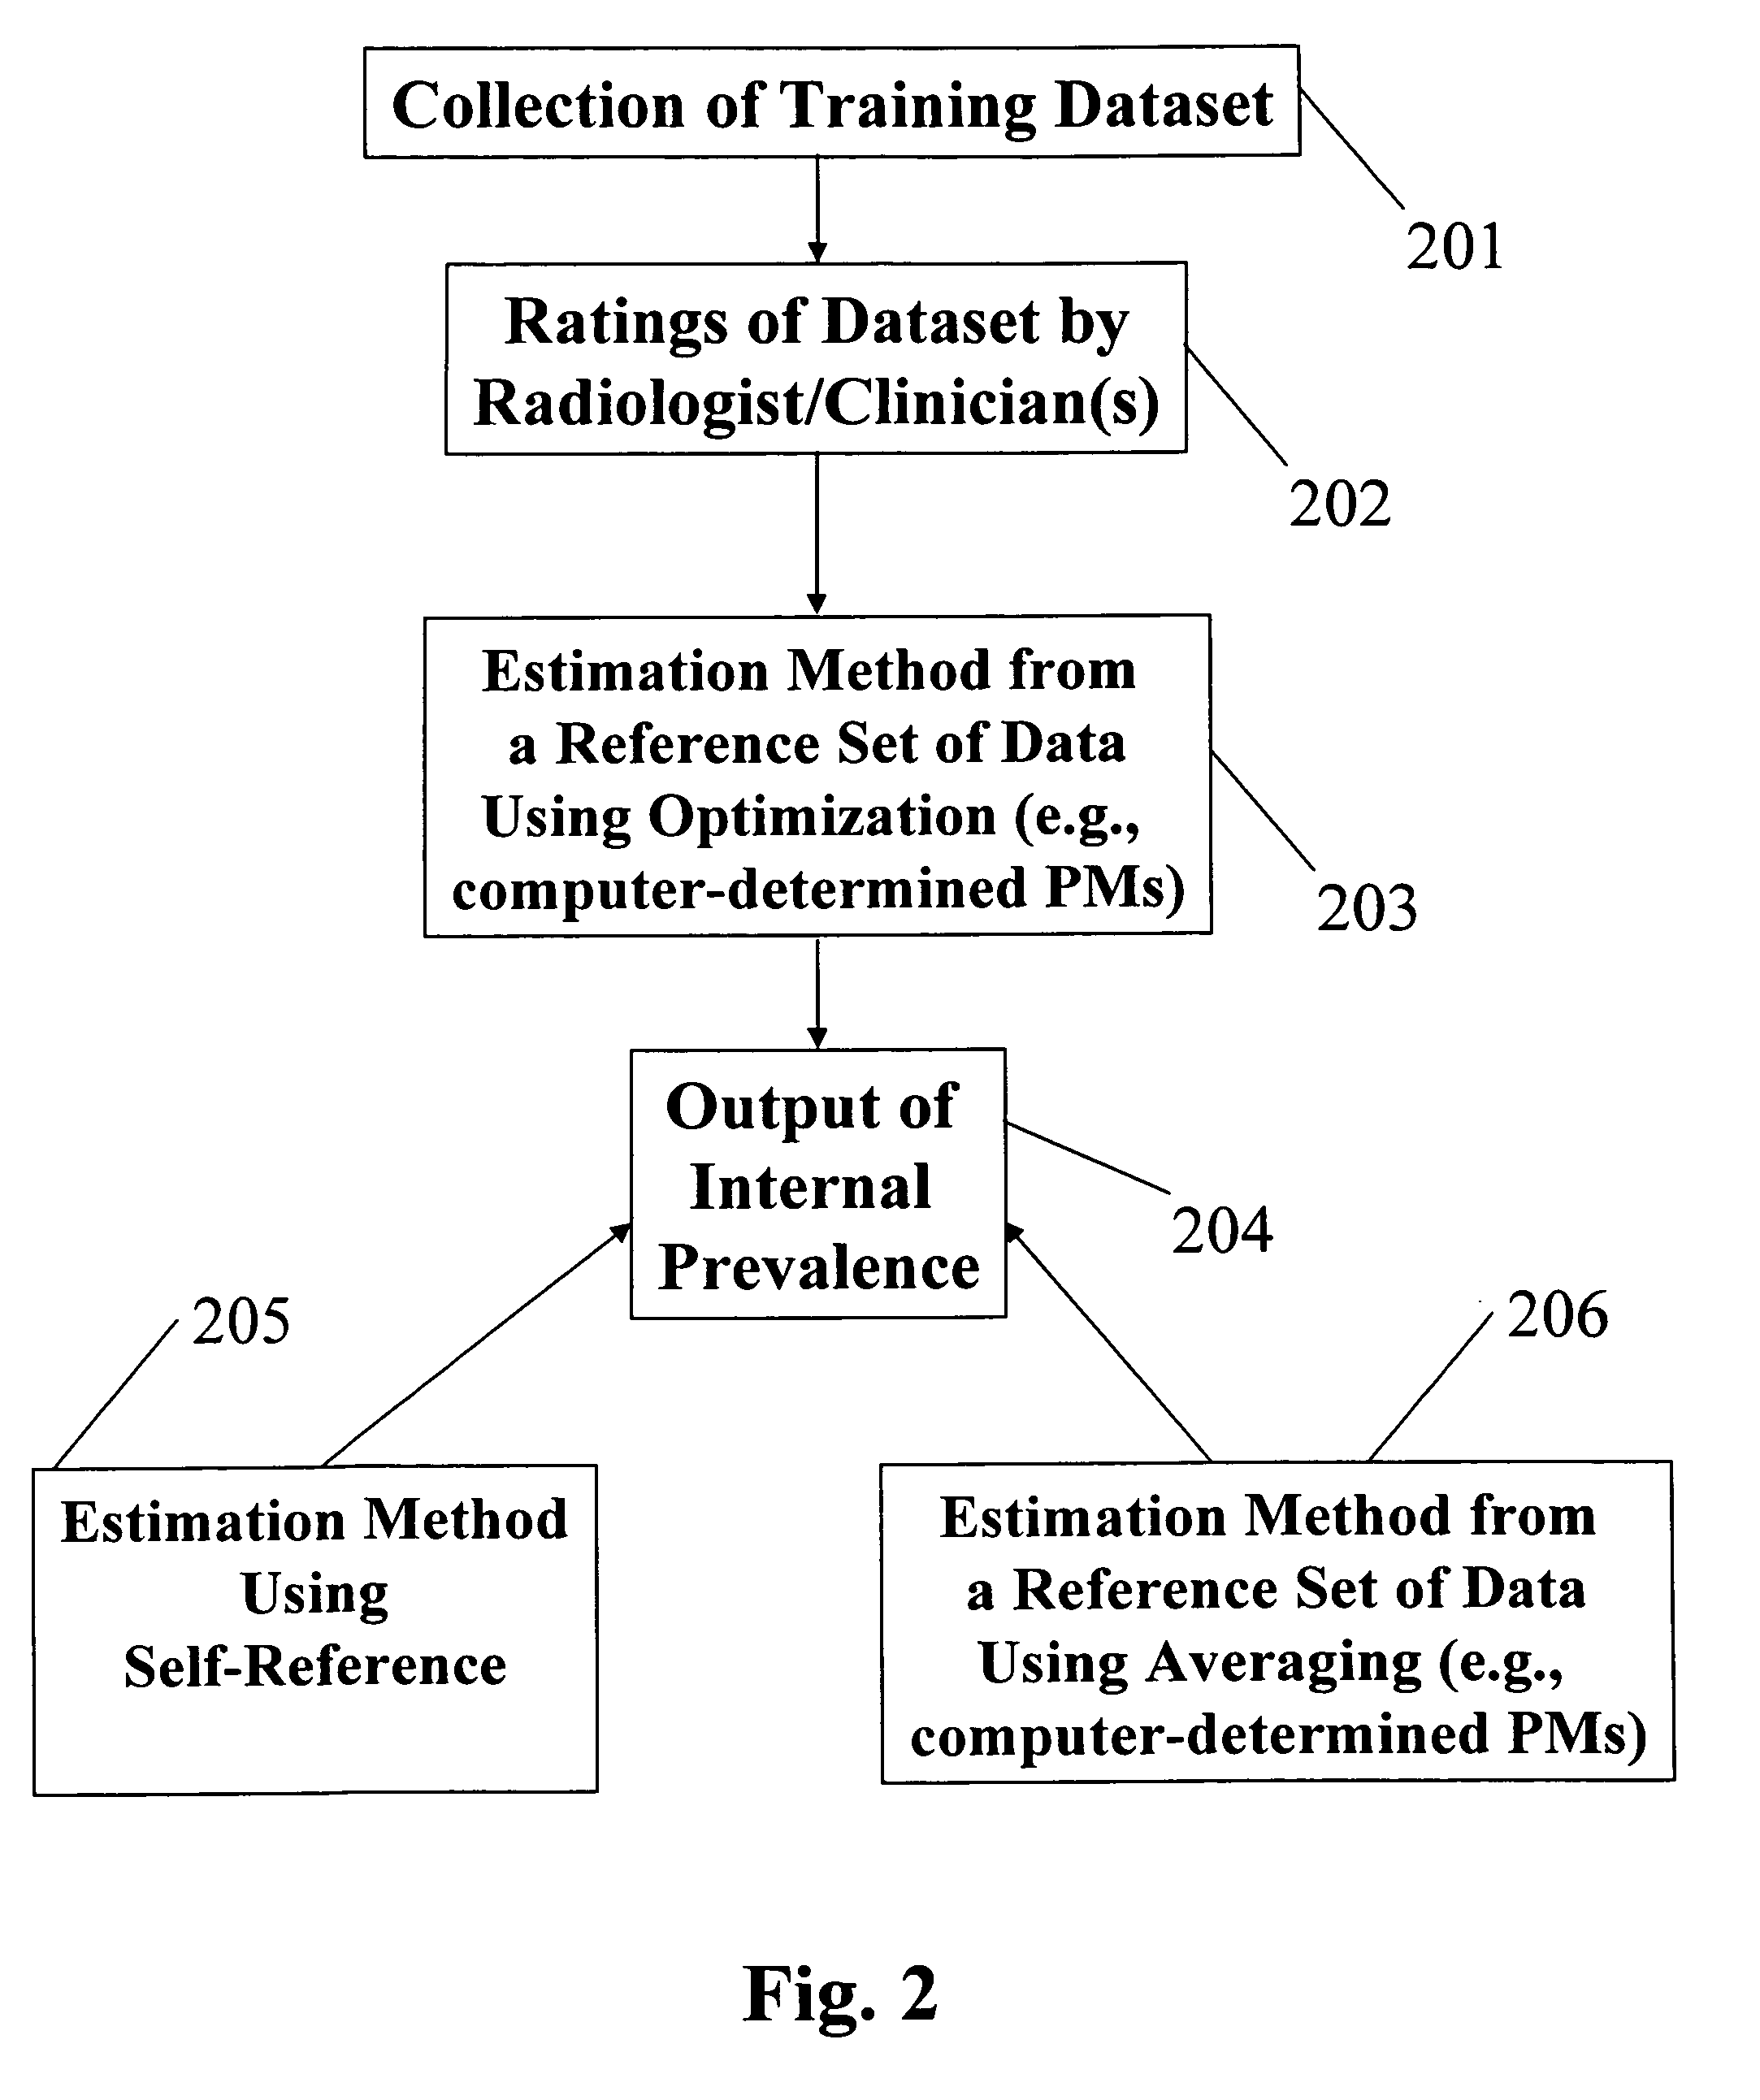 Method, system, and medium for prevalence-based computerized analysis of medical images and information